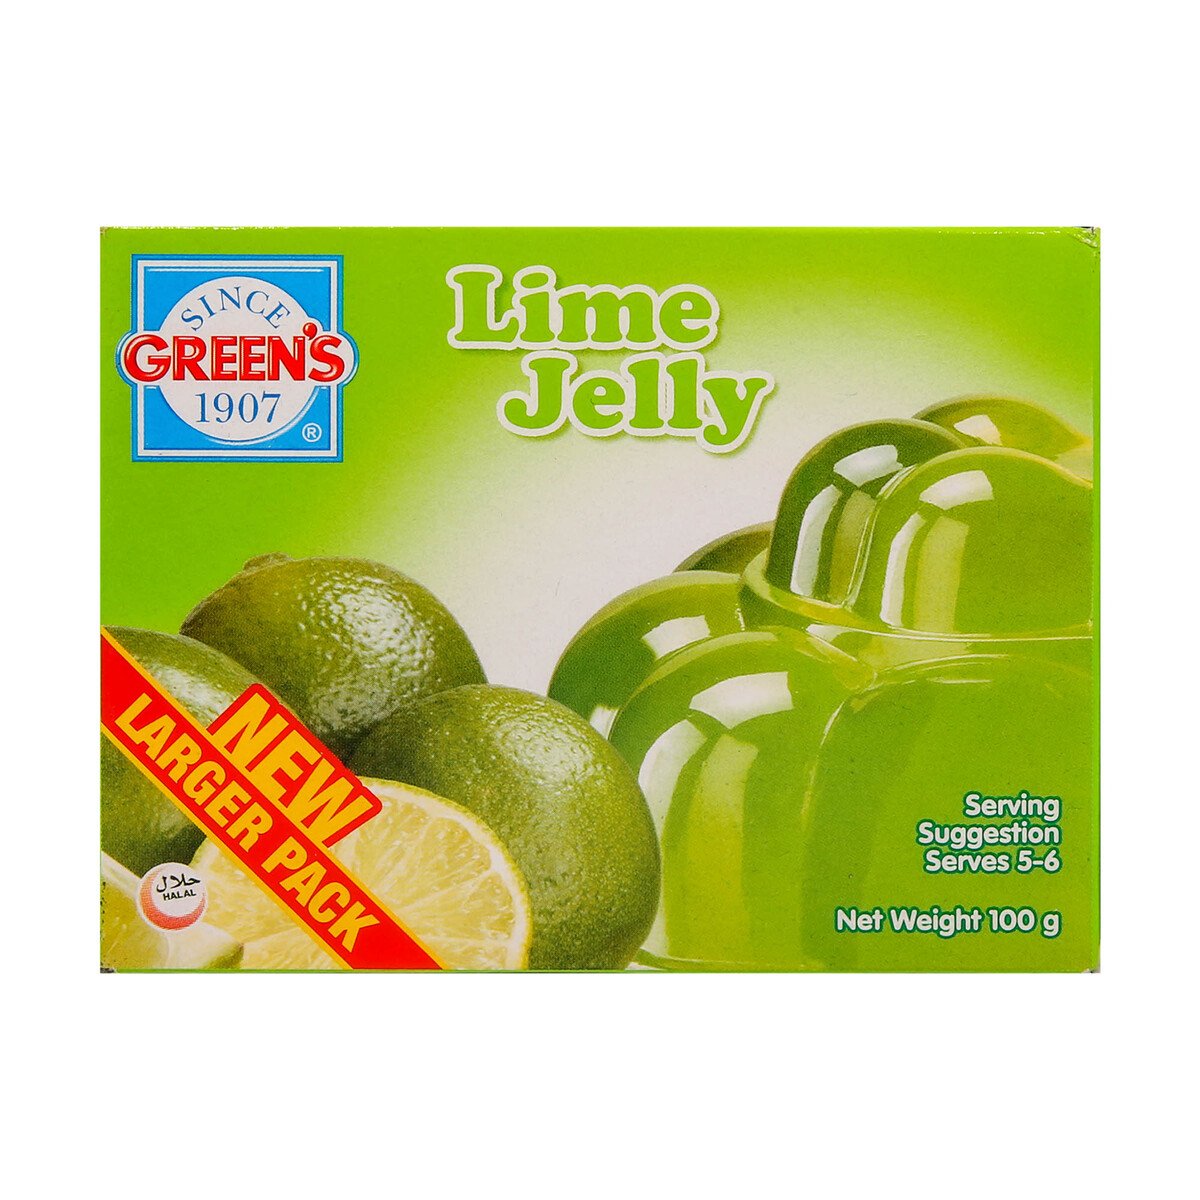 Greens Lime Jelly 100g